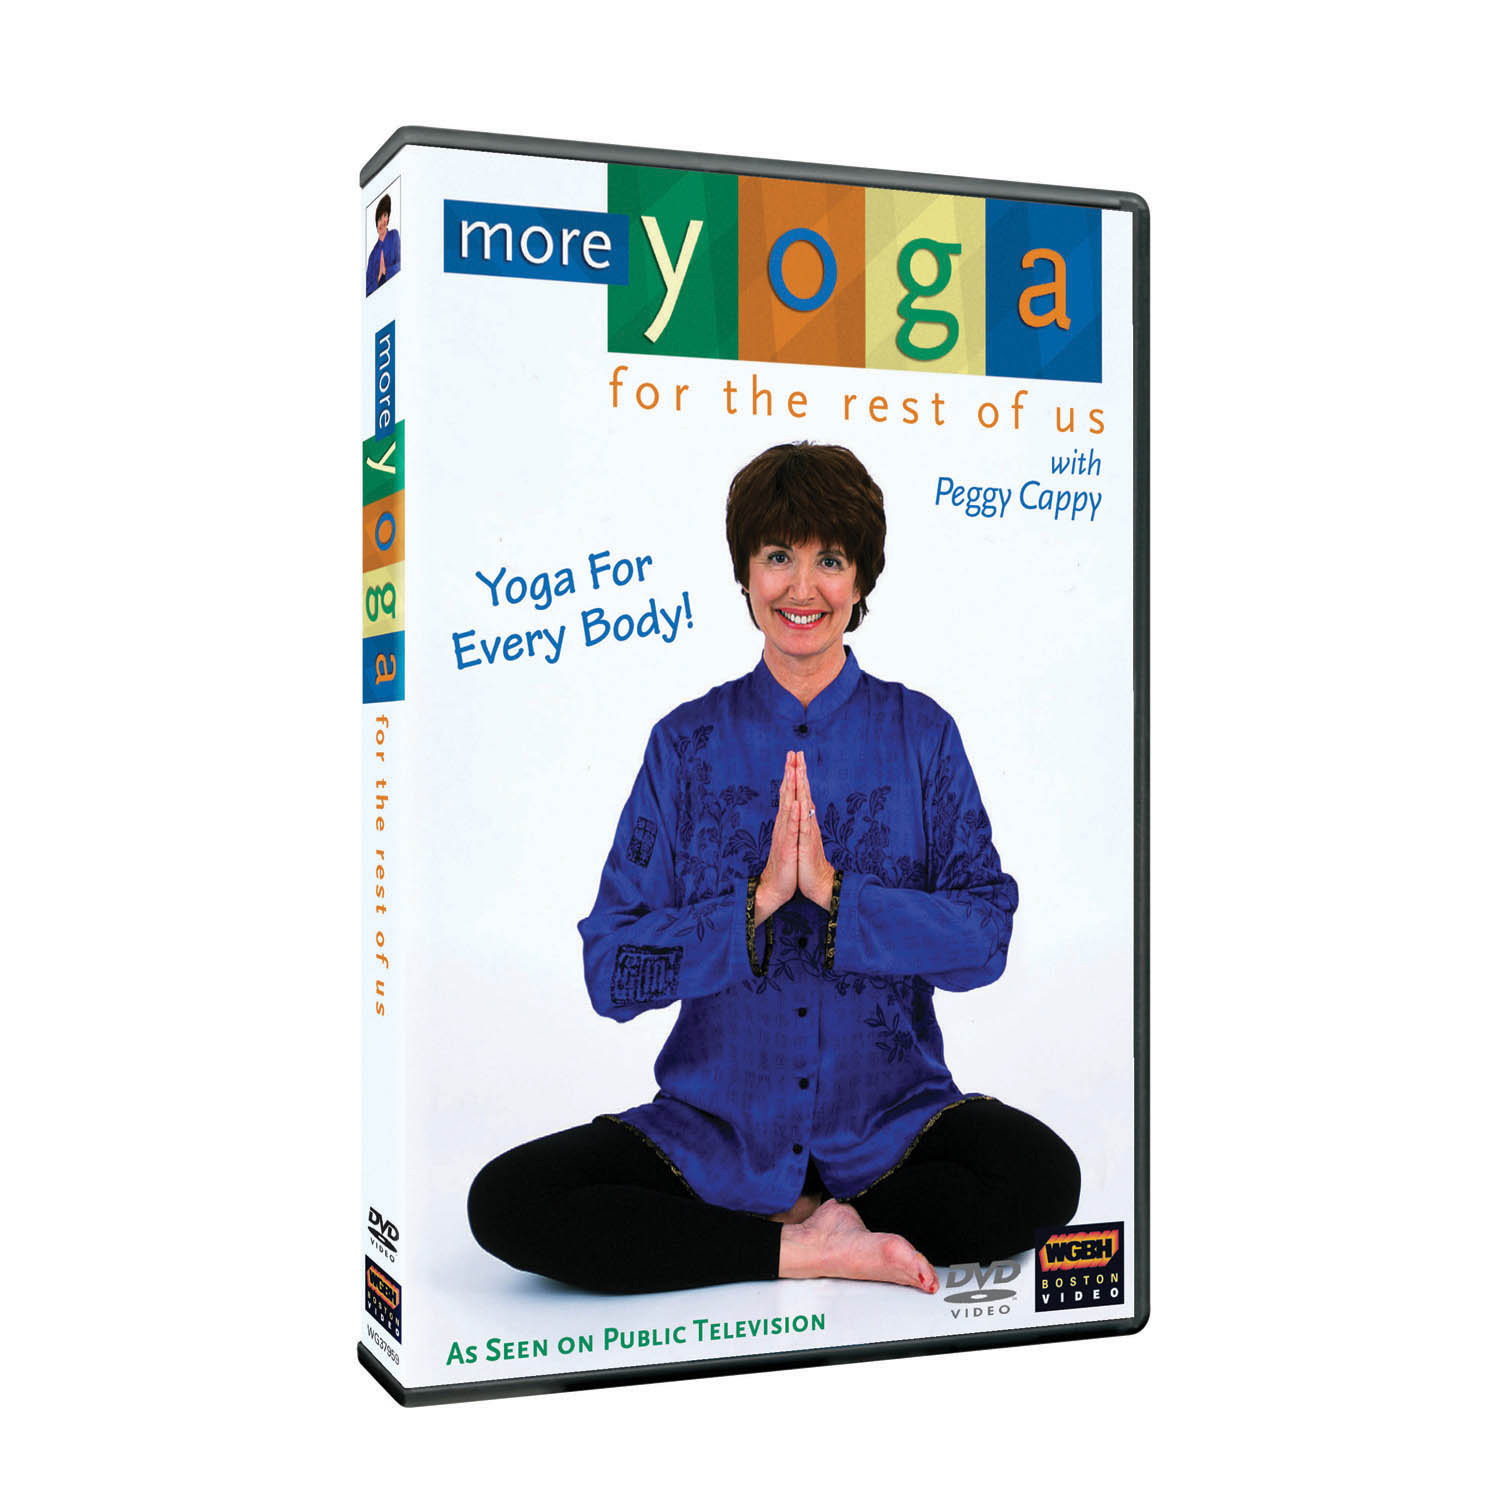 5-Minute Yoga Fix with Peggy Cappy DVD